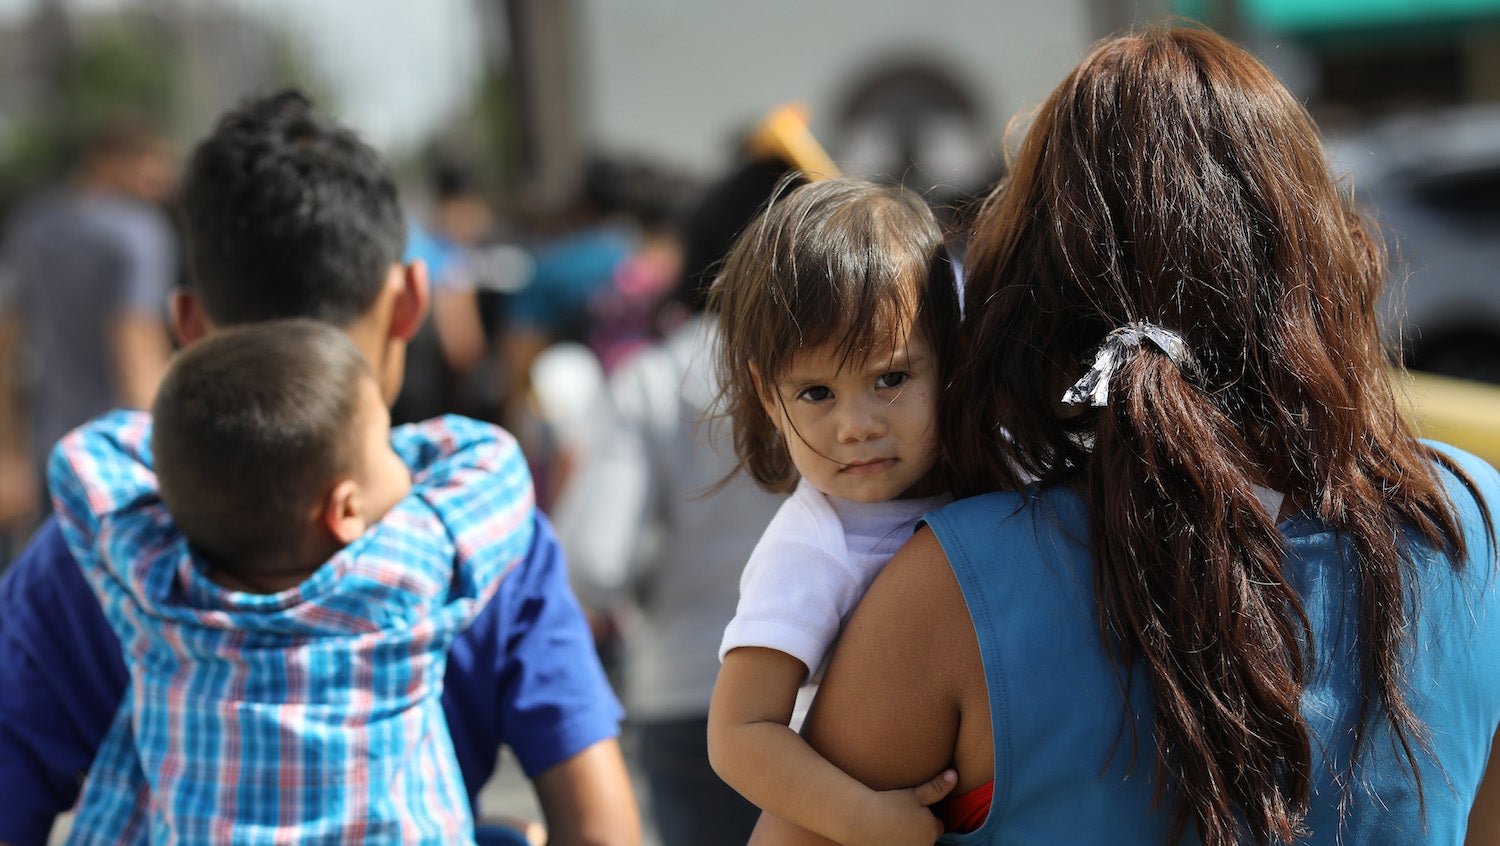 A Family Preparedness Plan helps ensure children's wellbeing in the event of family separation.